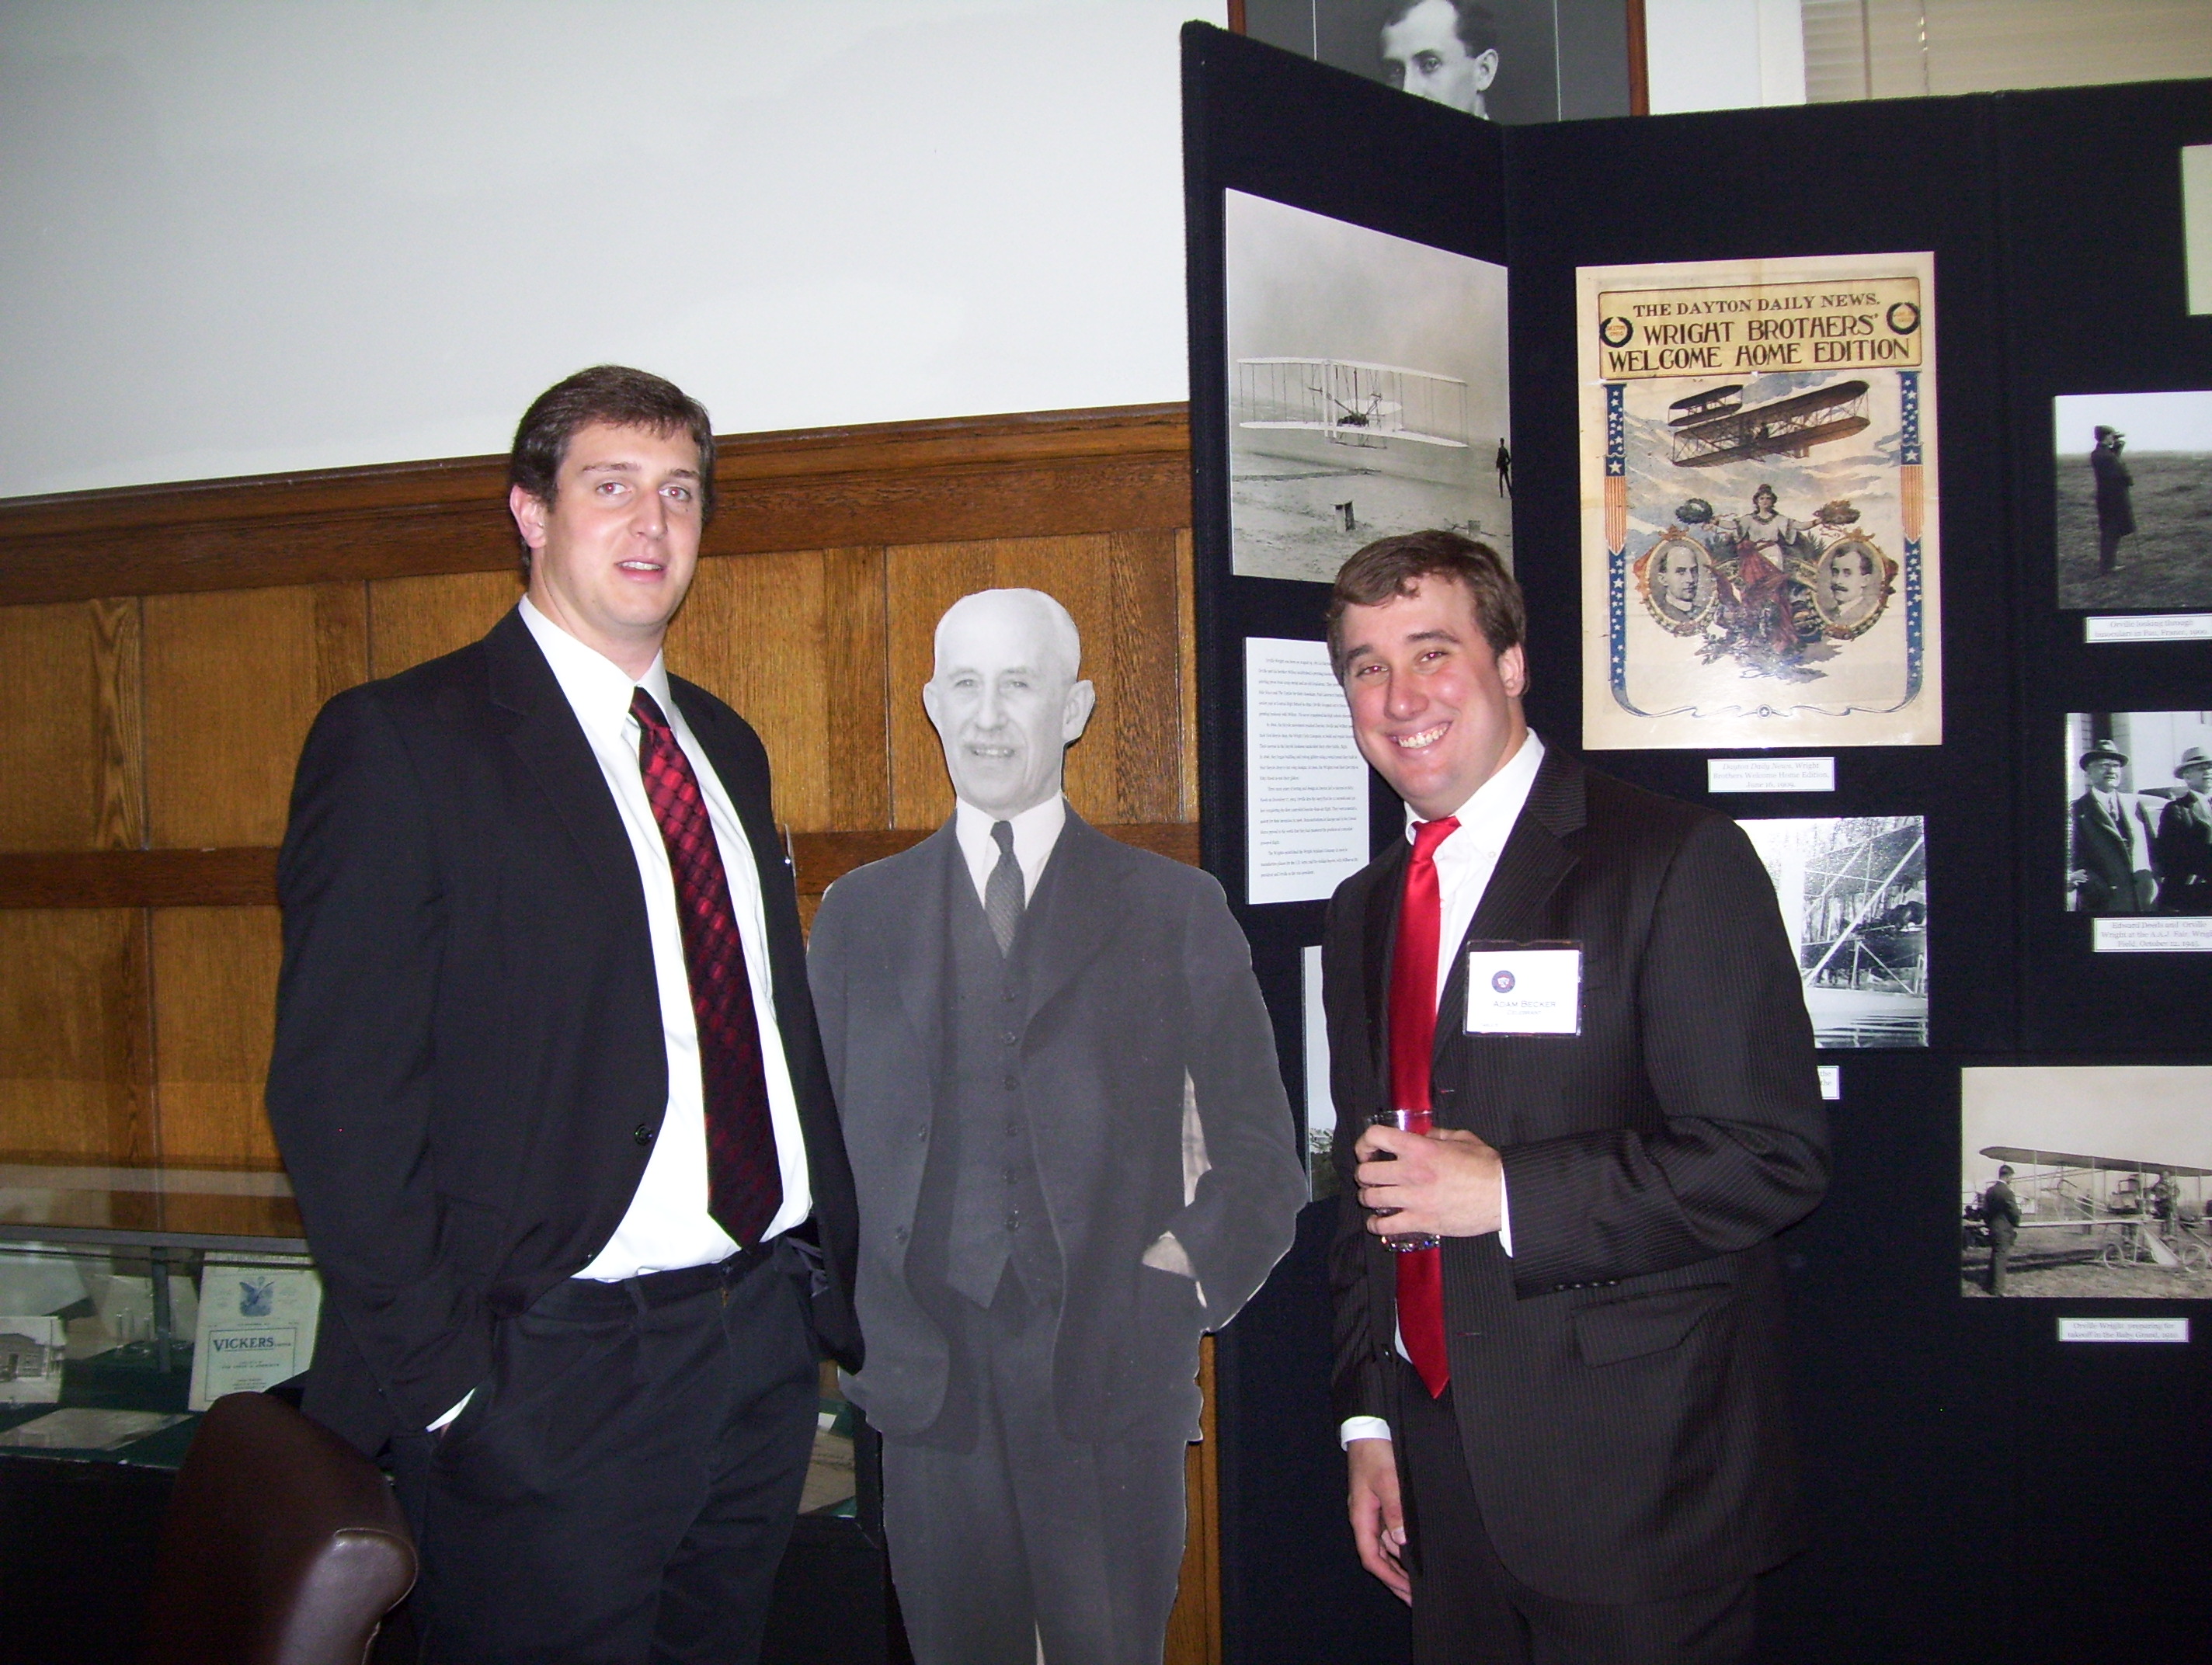 Jordan (left) and Adam with Orville Wright, April 26, 2014